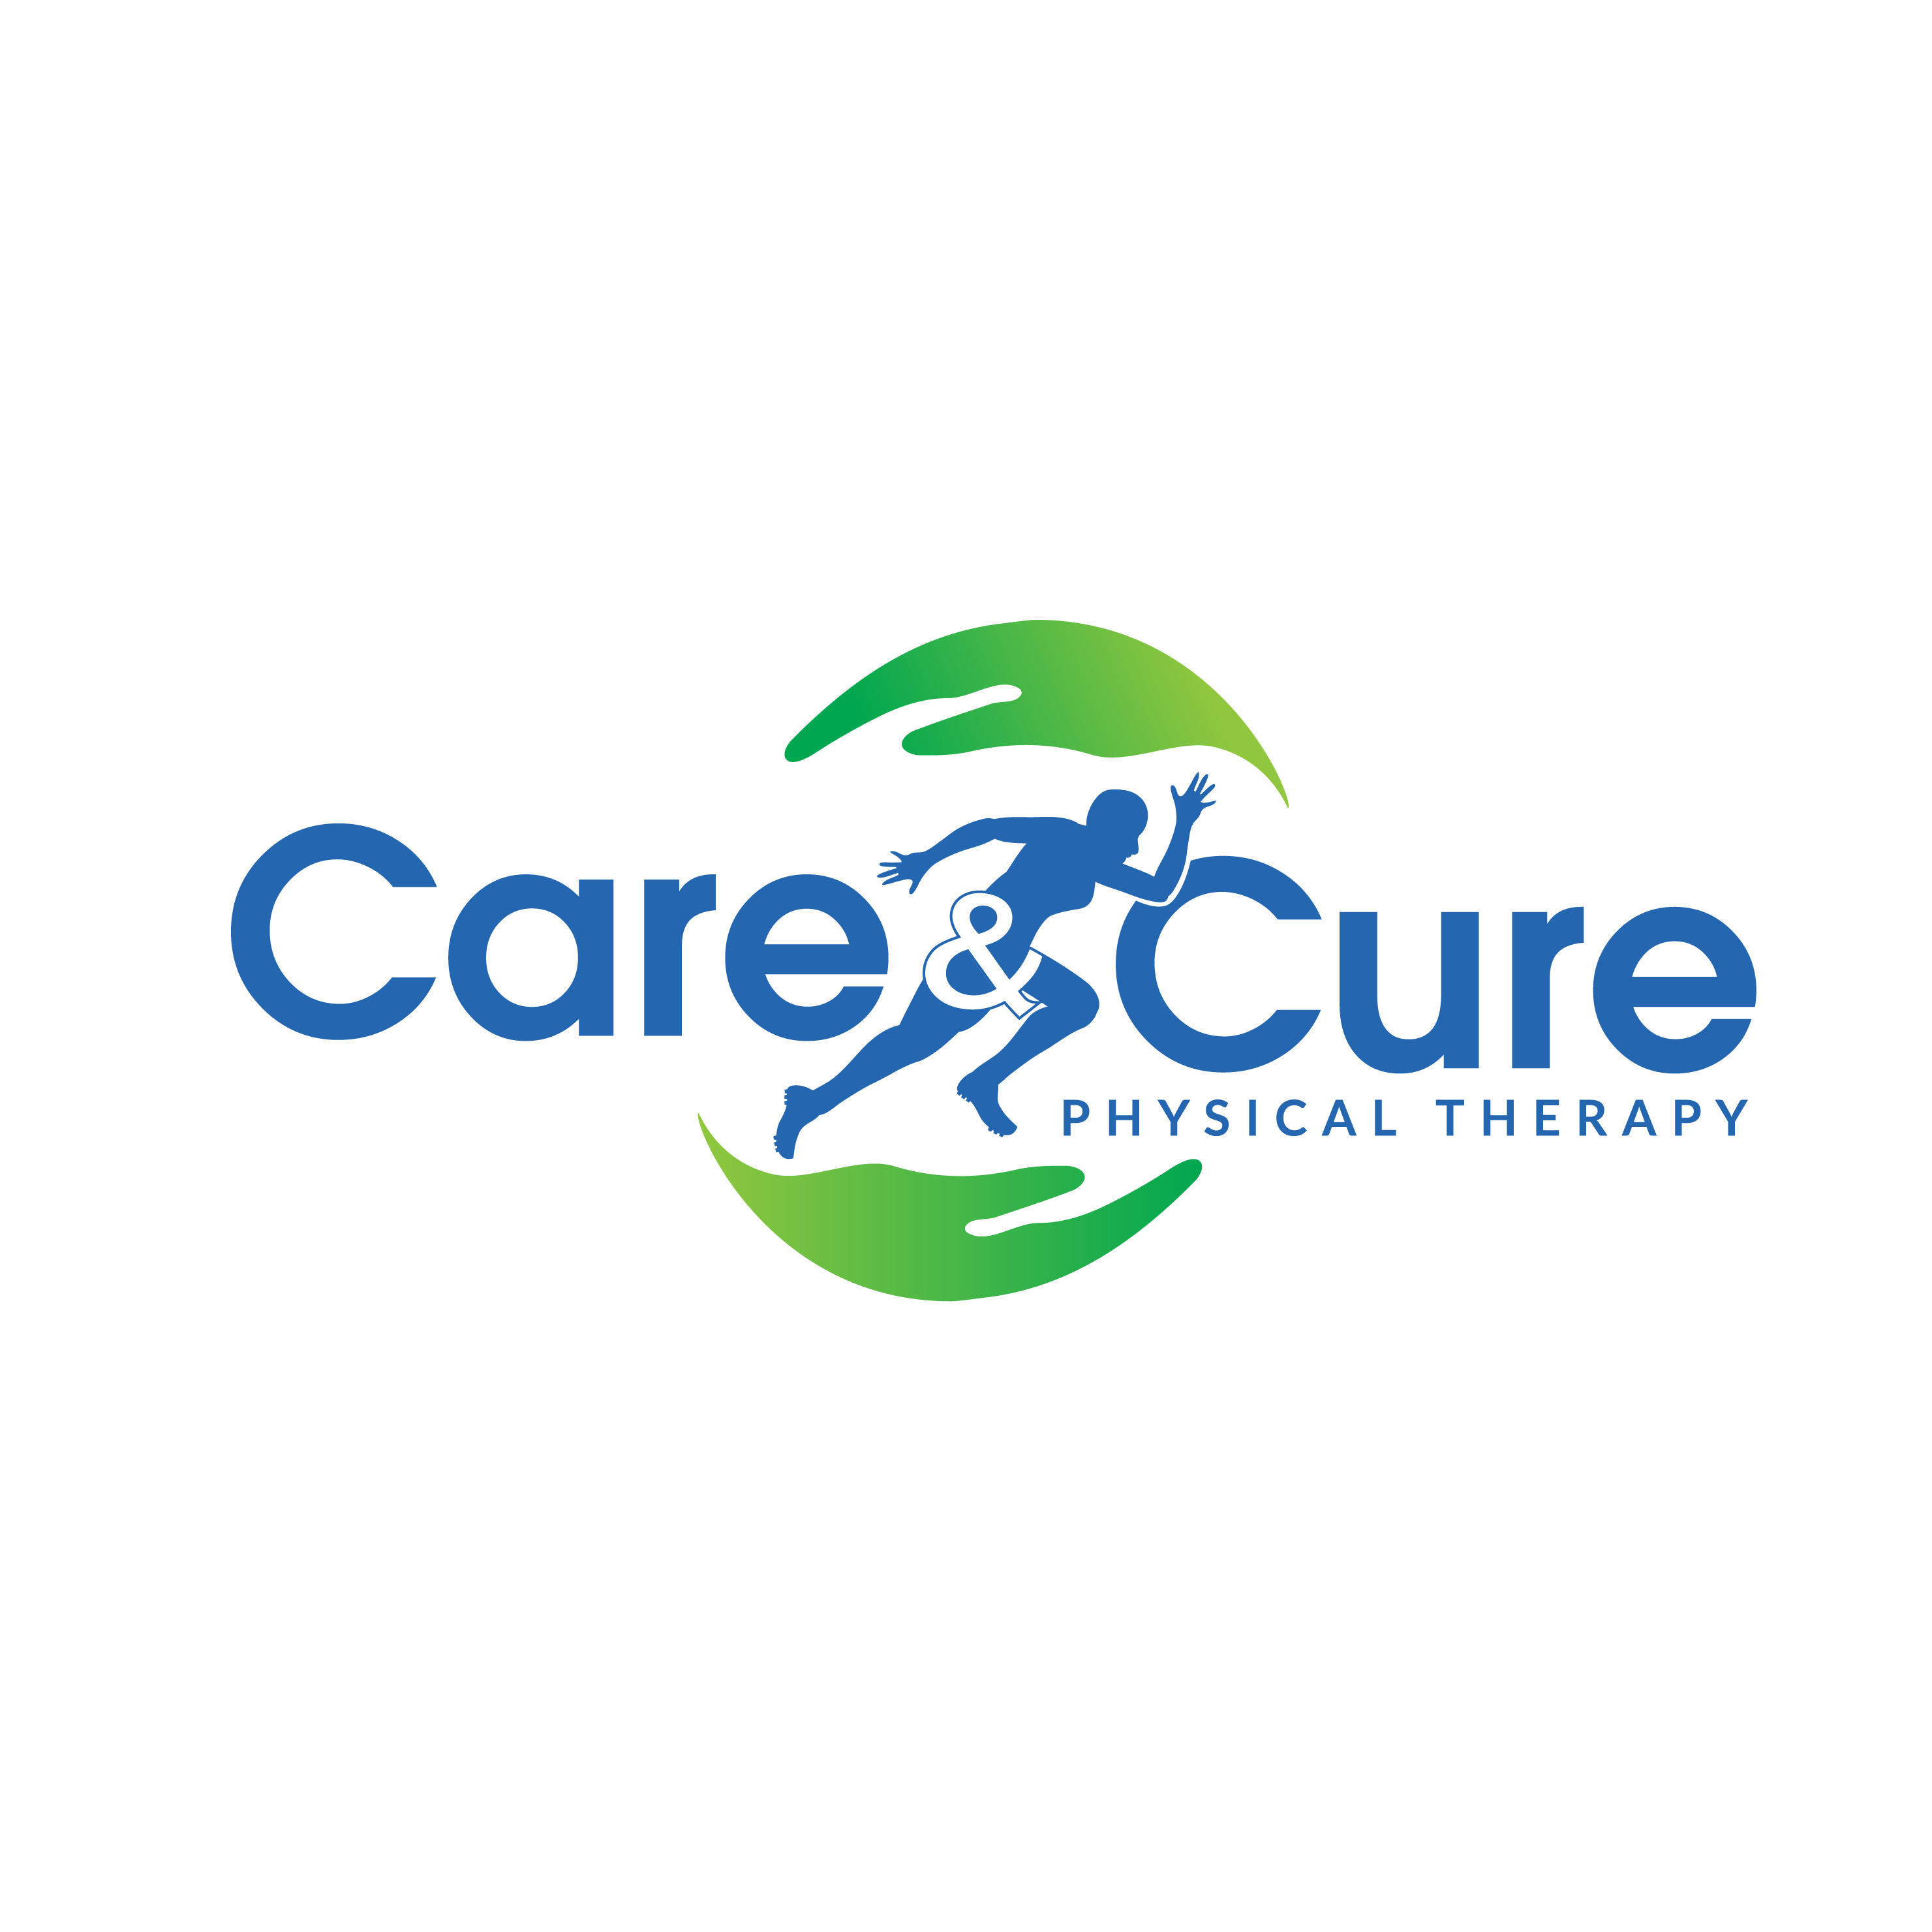 Care & Cure Physical Therapy Logo